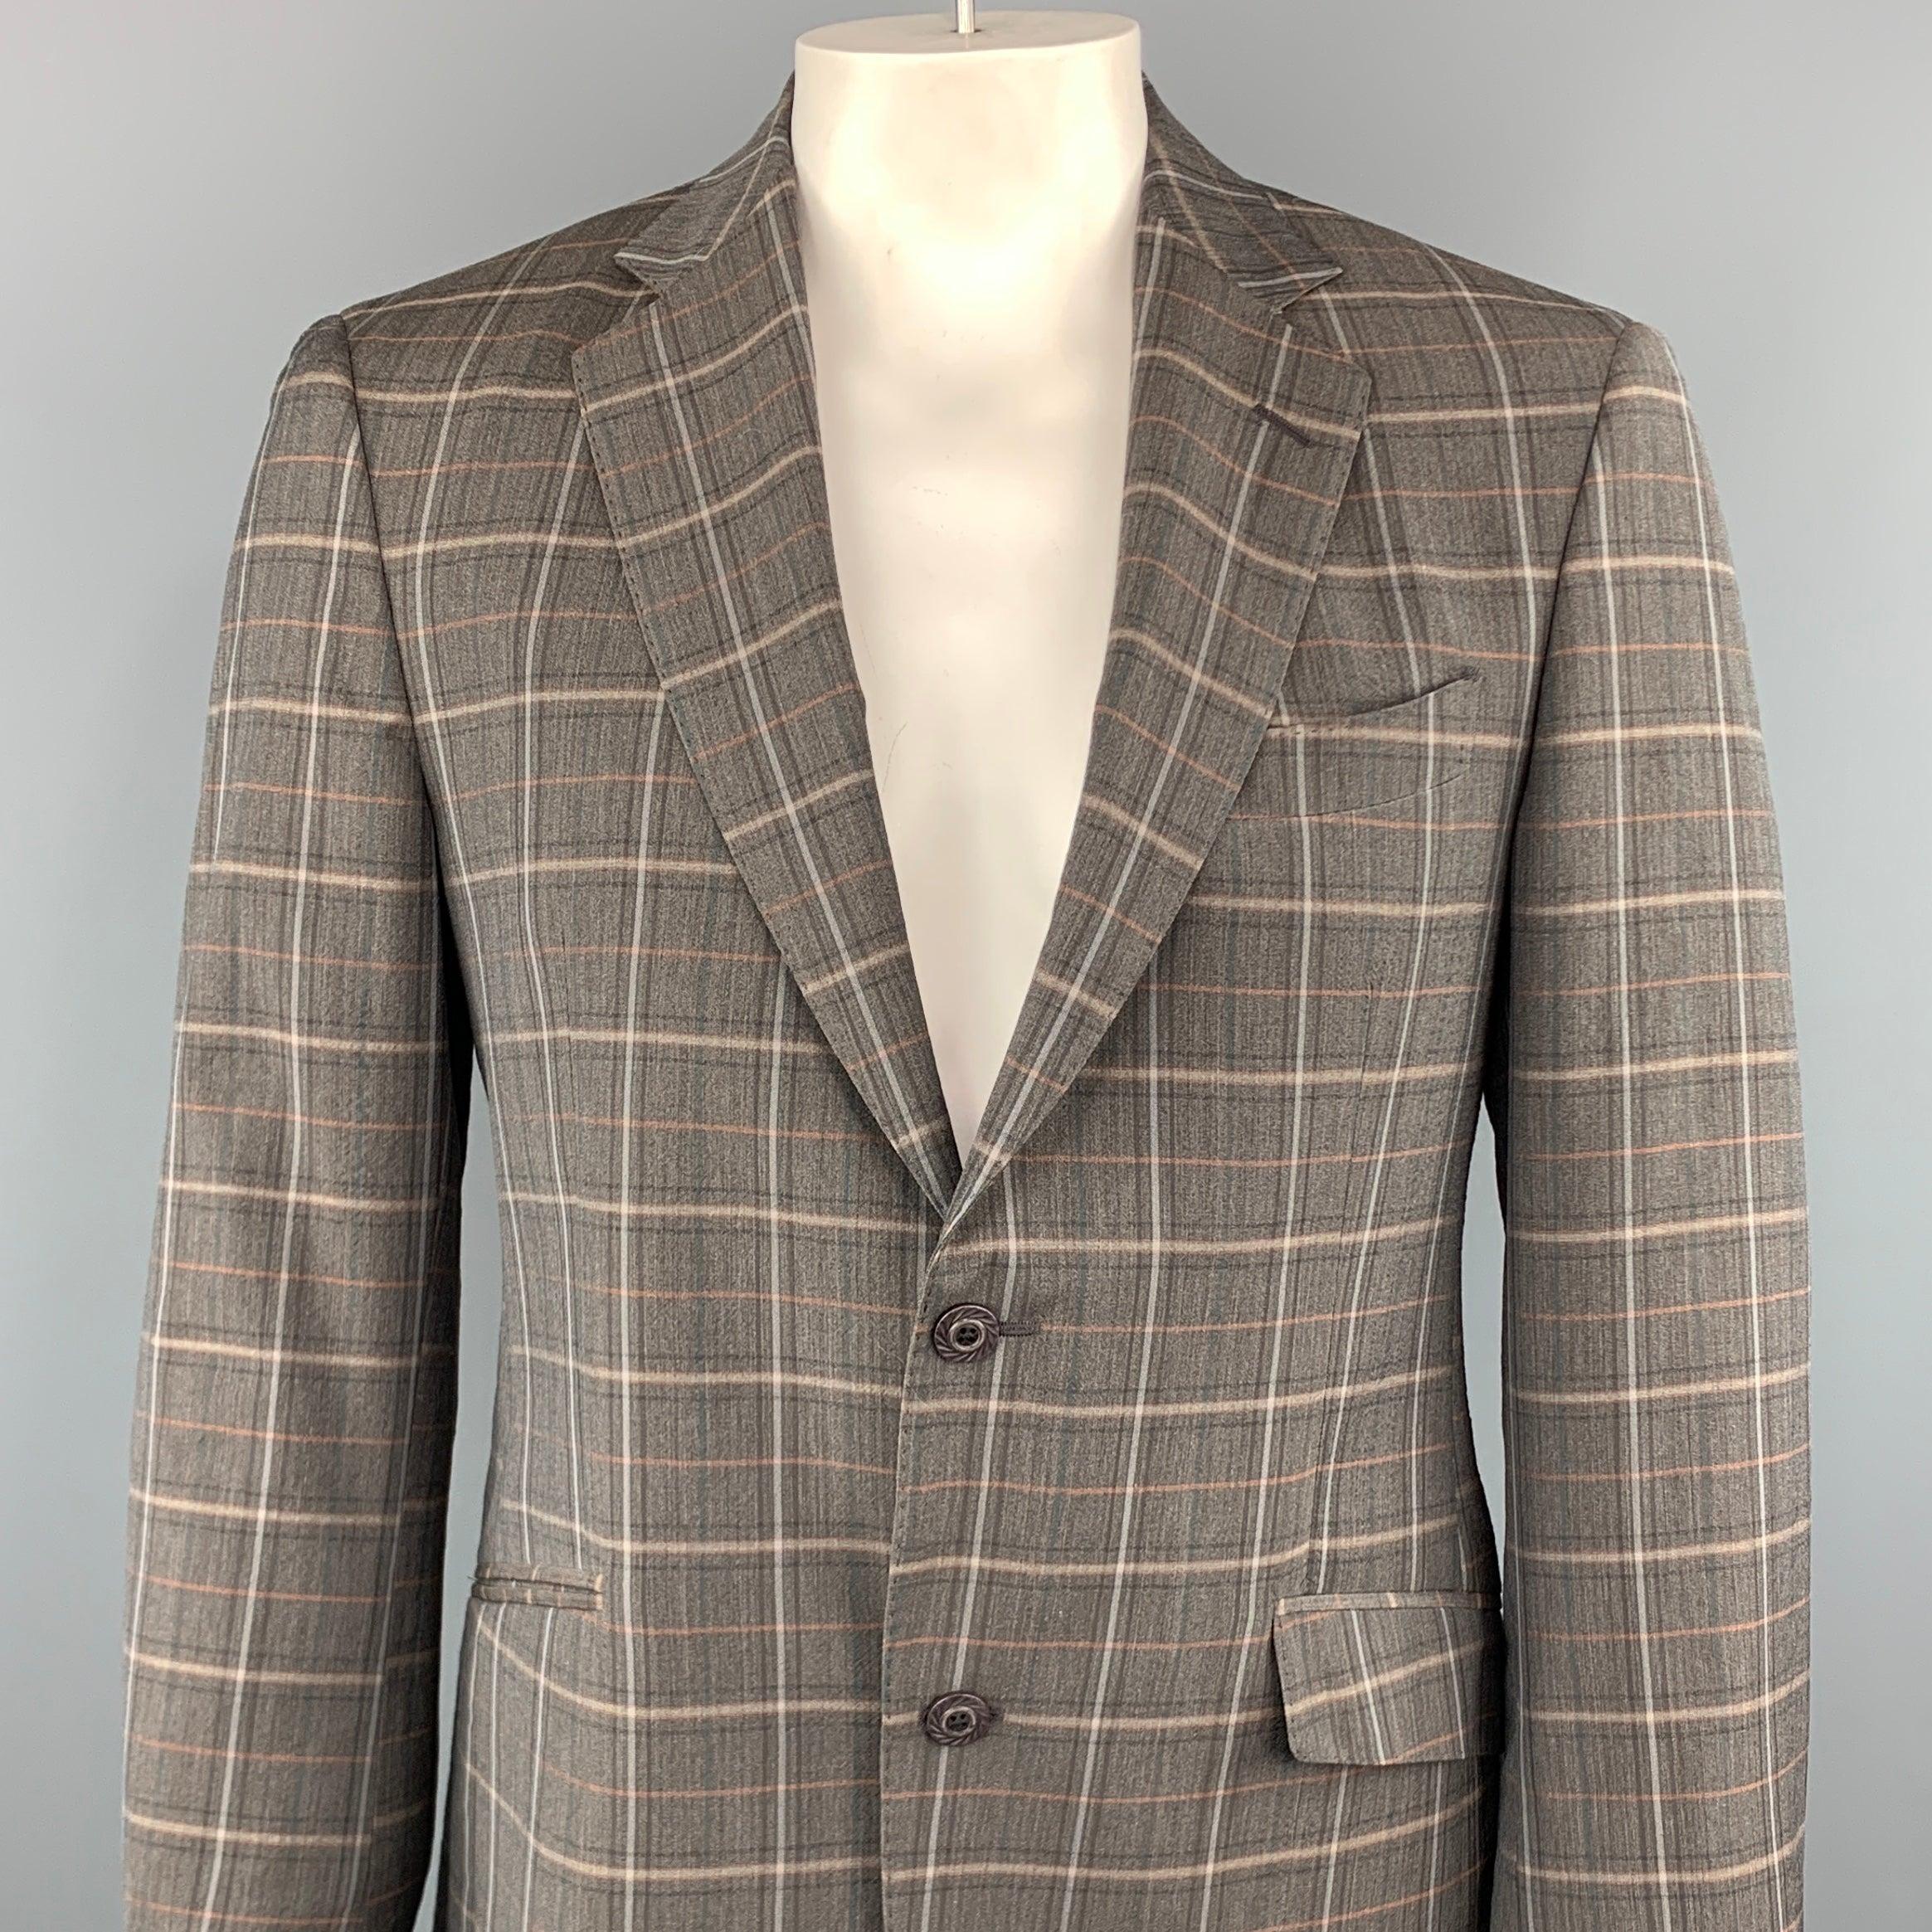 ETRO sport coat comes in a gray plaid wool and elastane featuring a notch lapel style, two button closure, and front flap pockets. Made in Italy.Excellent Pre-Owned Condition. 

Marked:   50 

Measurements: 
 
Shoulder: 17 inches  Chest: 39 inches 